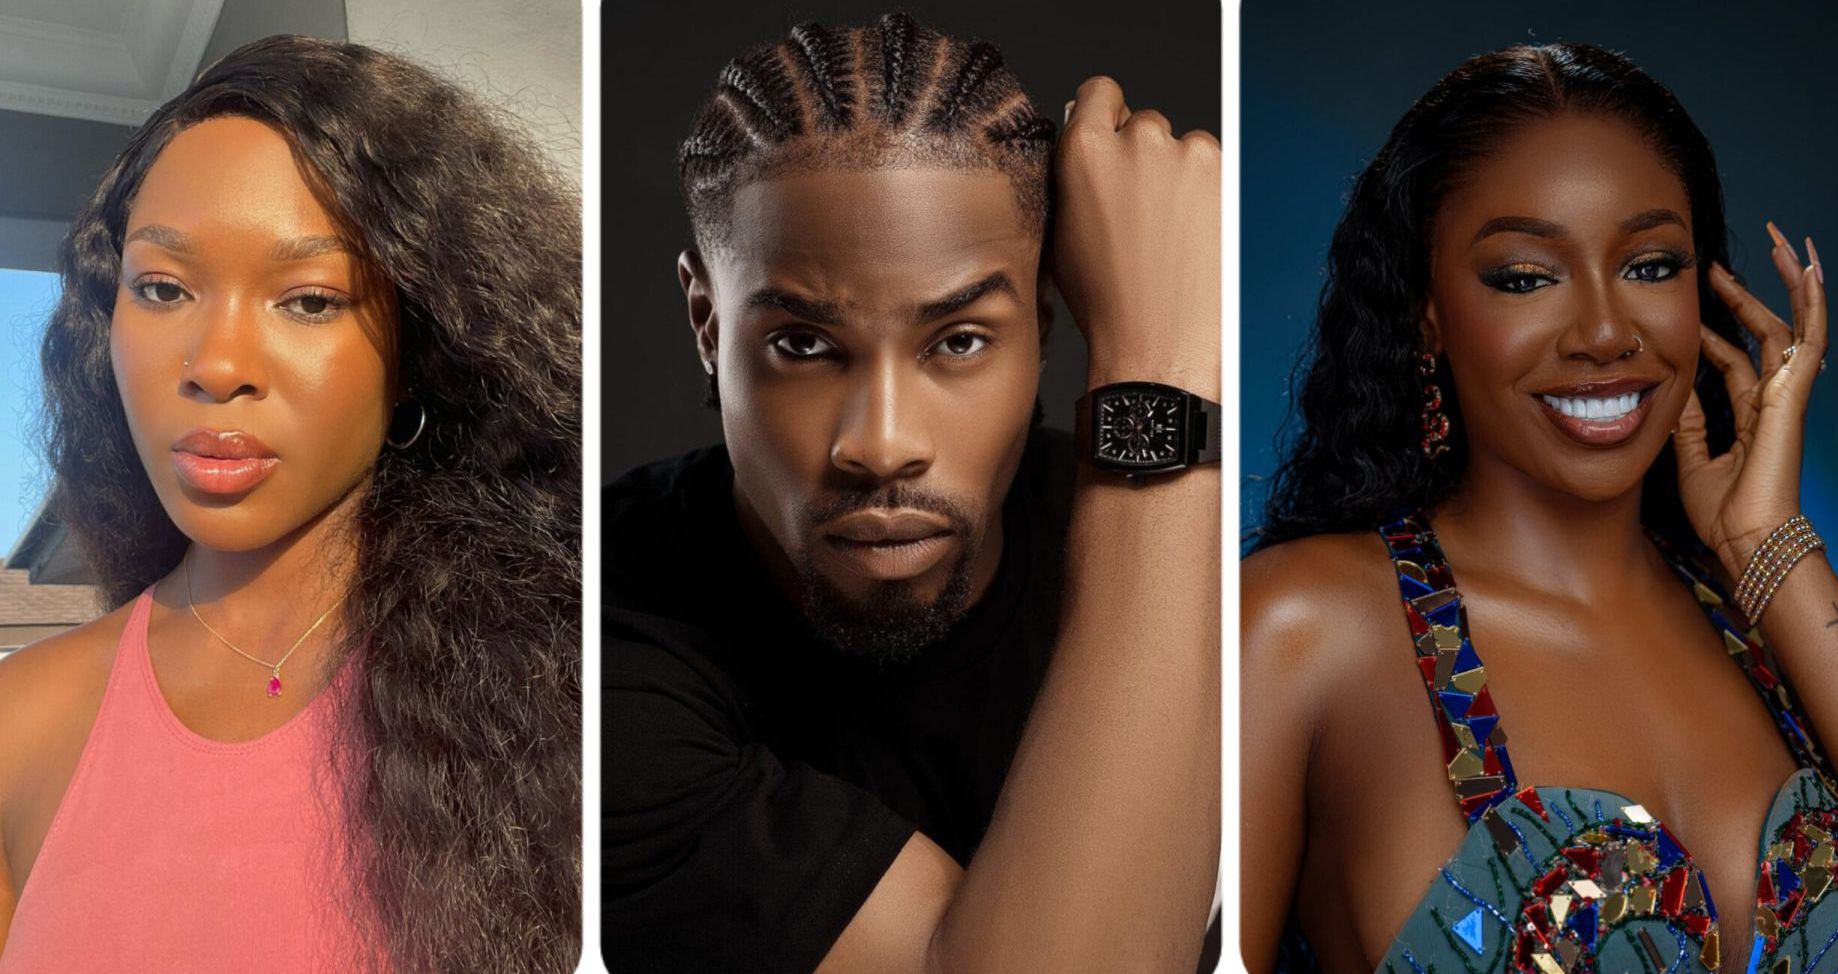 Bbnaija All-Stars: Vee &Quot;Confirms Suspicions&Quot; As Tolani Baj Expresses Feelings For Neo, Yours Truly, Top Stories, September 23, 2023